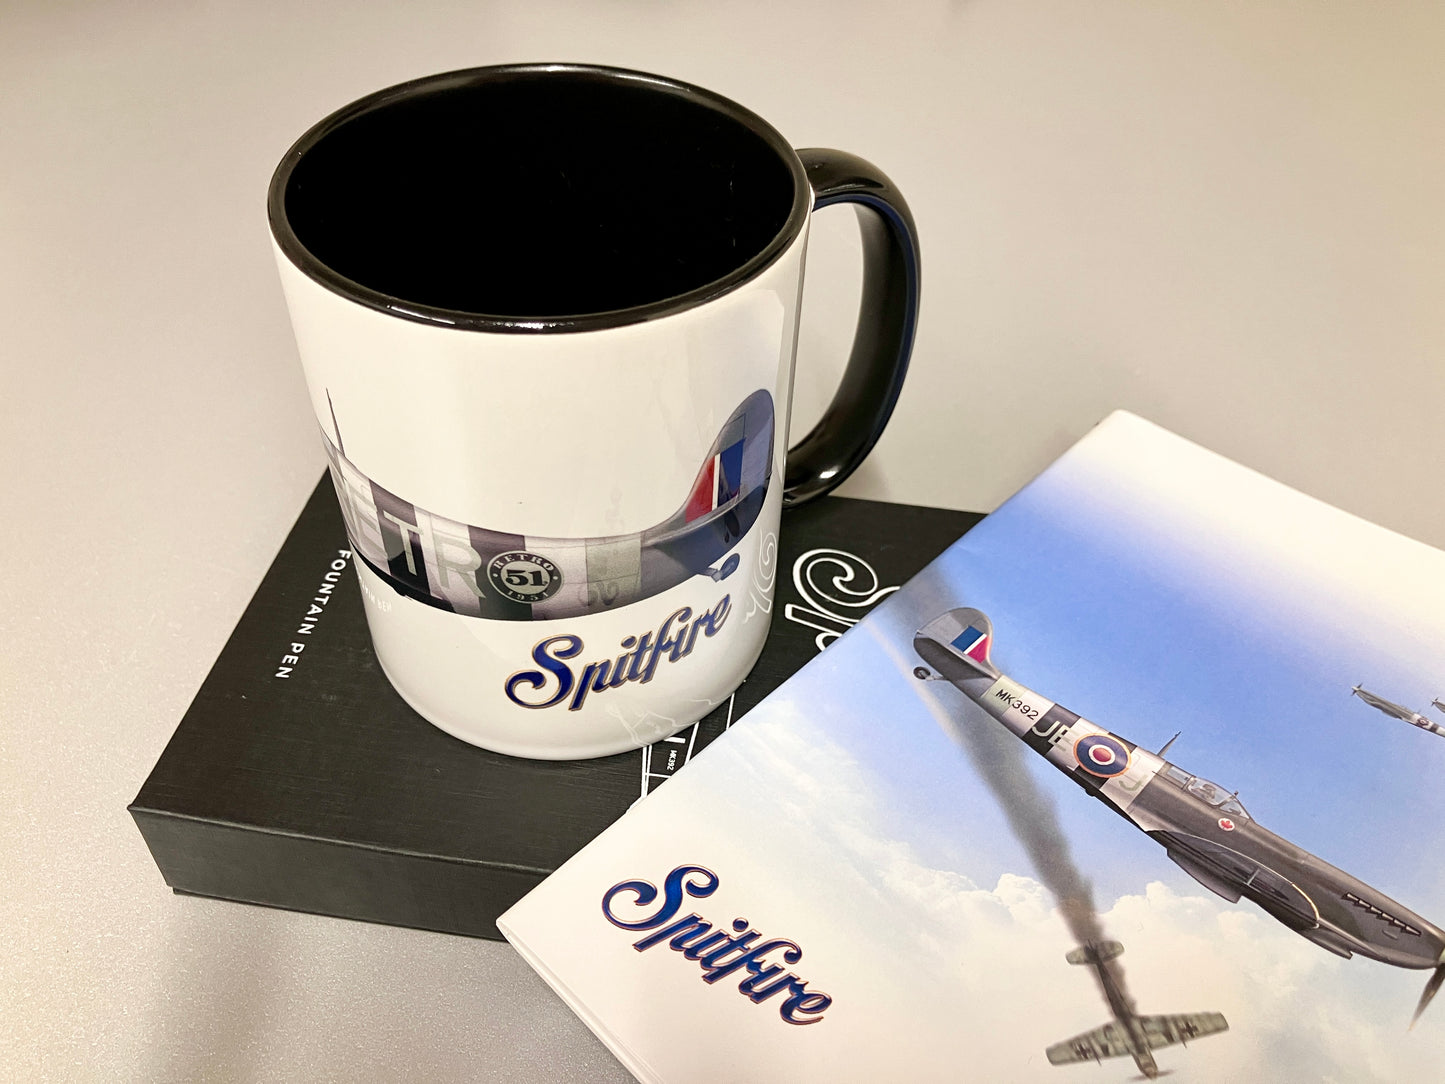 Retro 51 x Mann Inc Spitfire Cup (We call this a Mug in the UK)